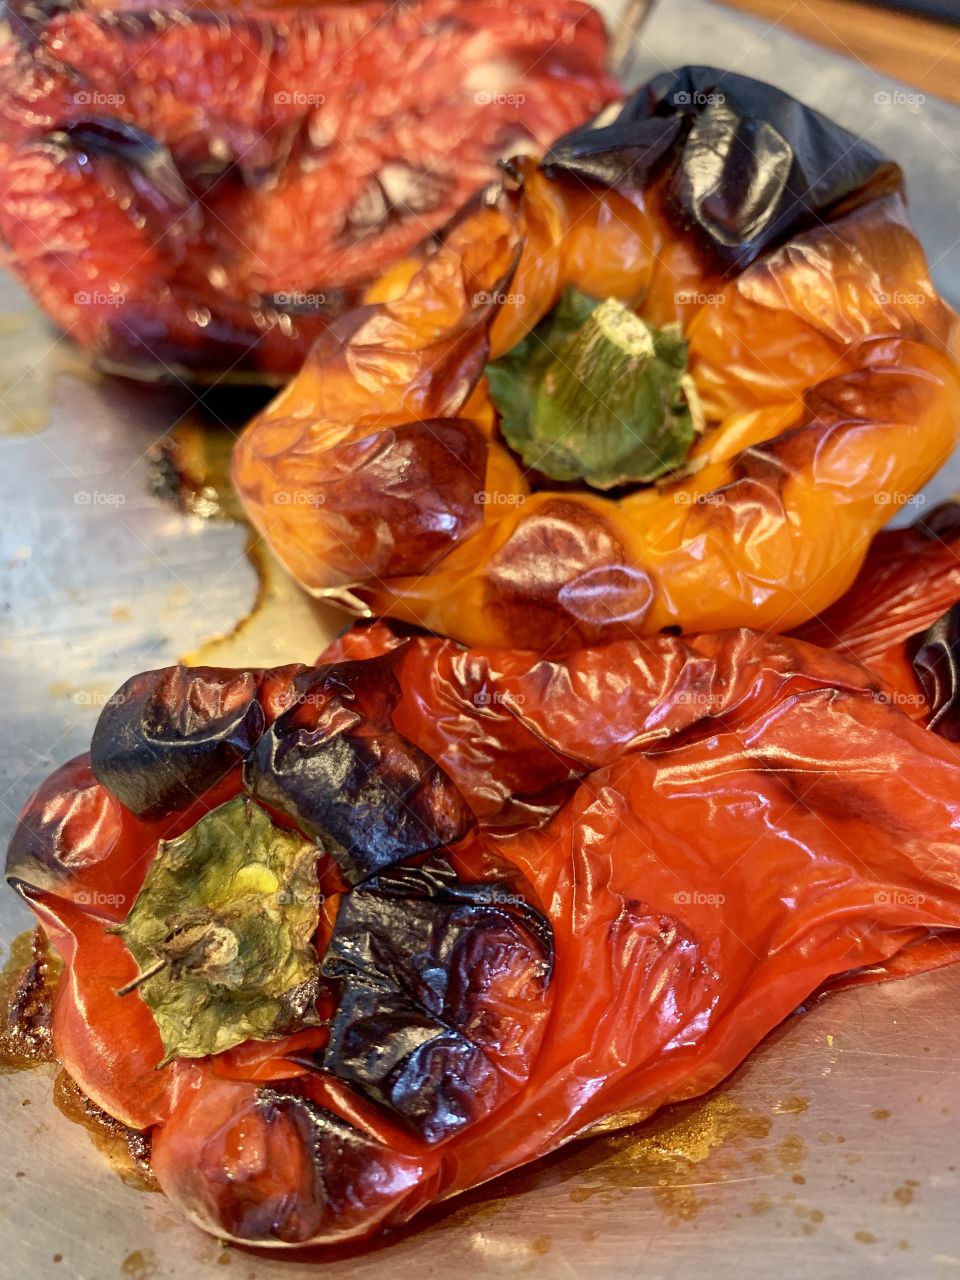 Oven roasted peppers 